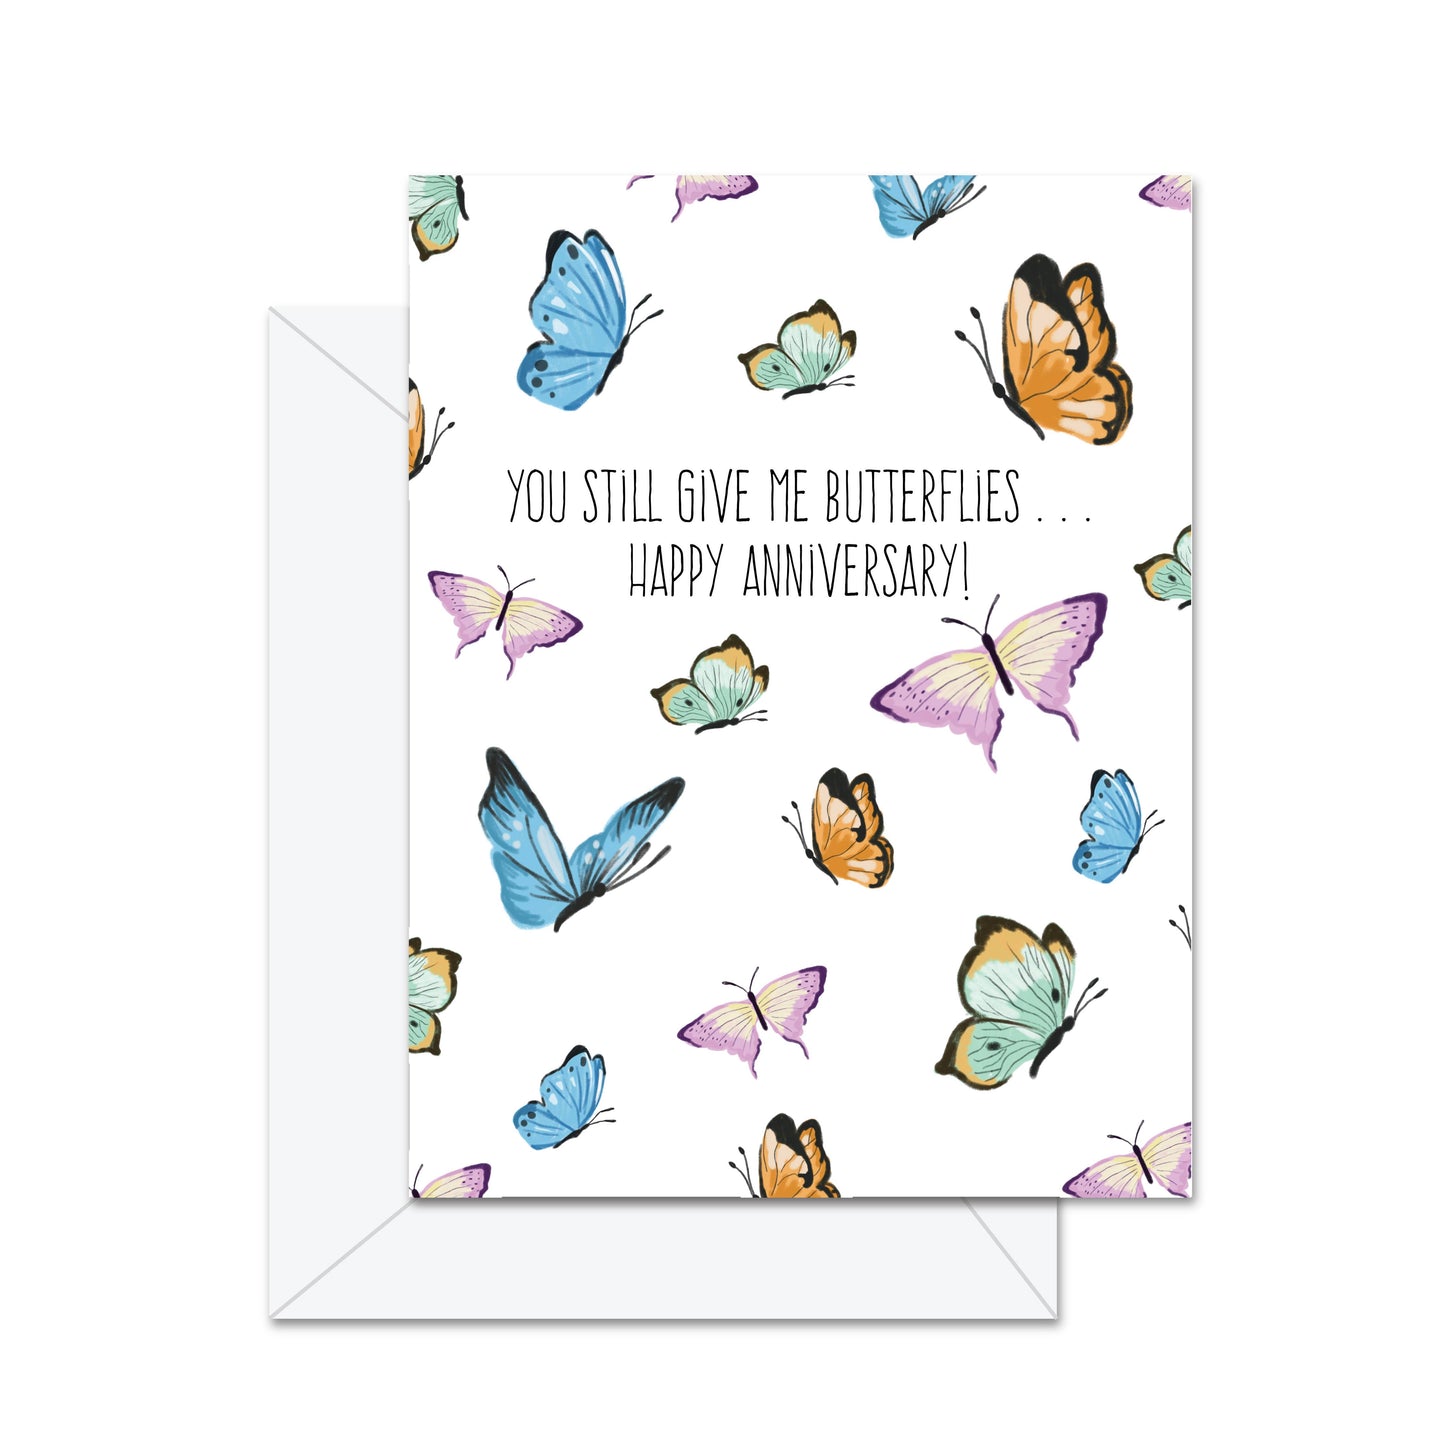 Jaybee Design - You Still Give Me Butterflies . . .  - Greeting Card